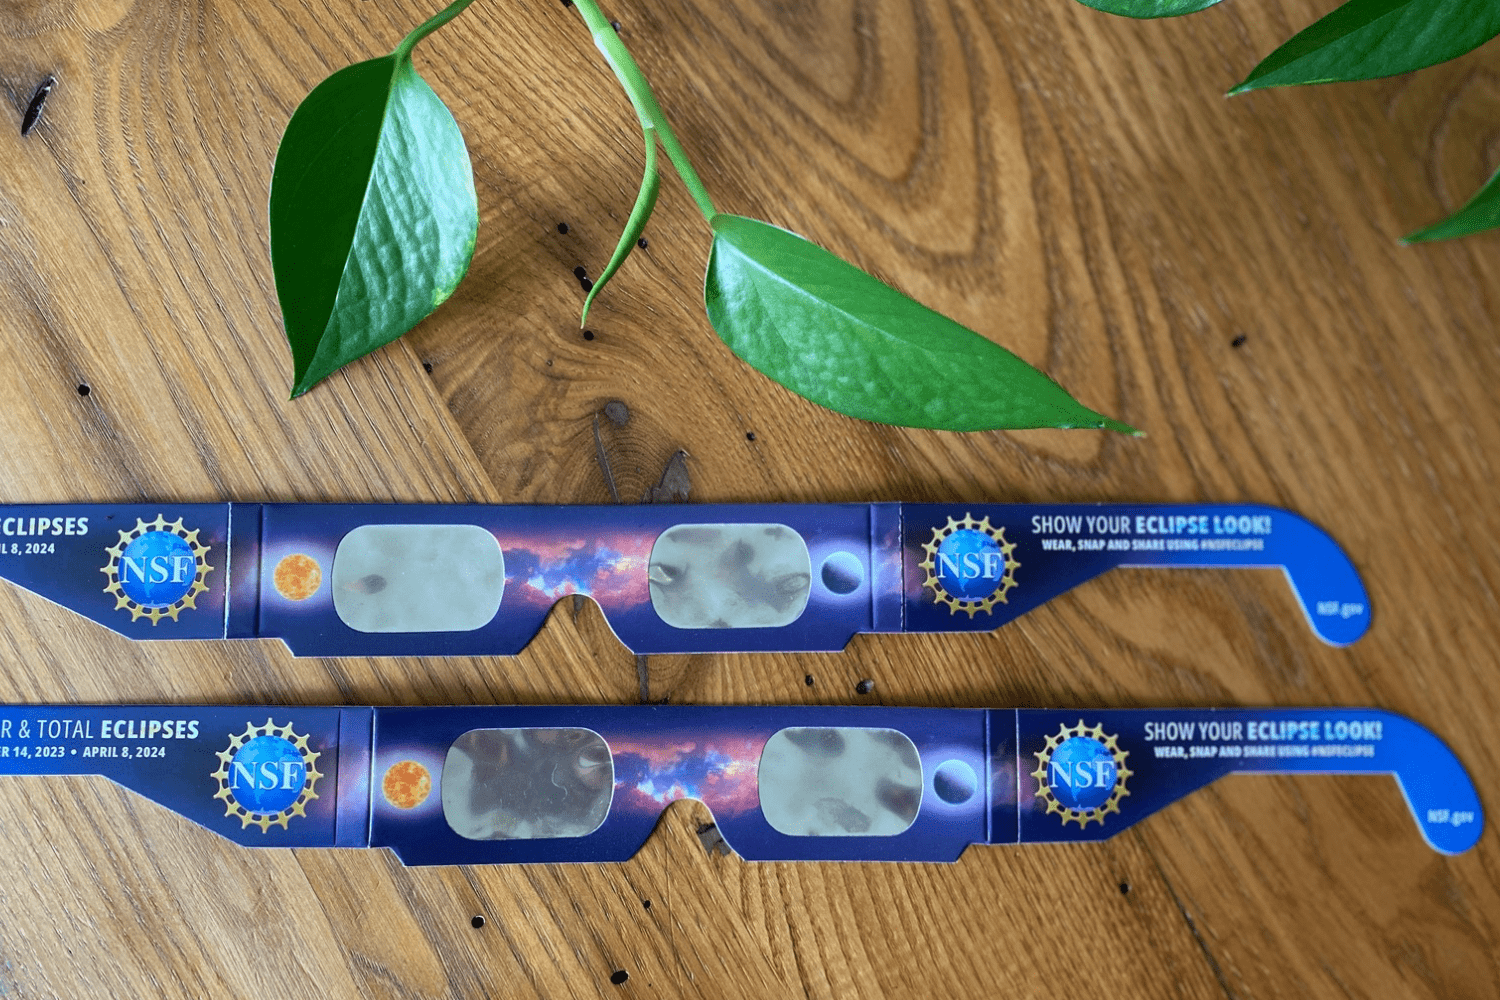 Solar eclipse glasses sit on a wooden table with a green plant